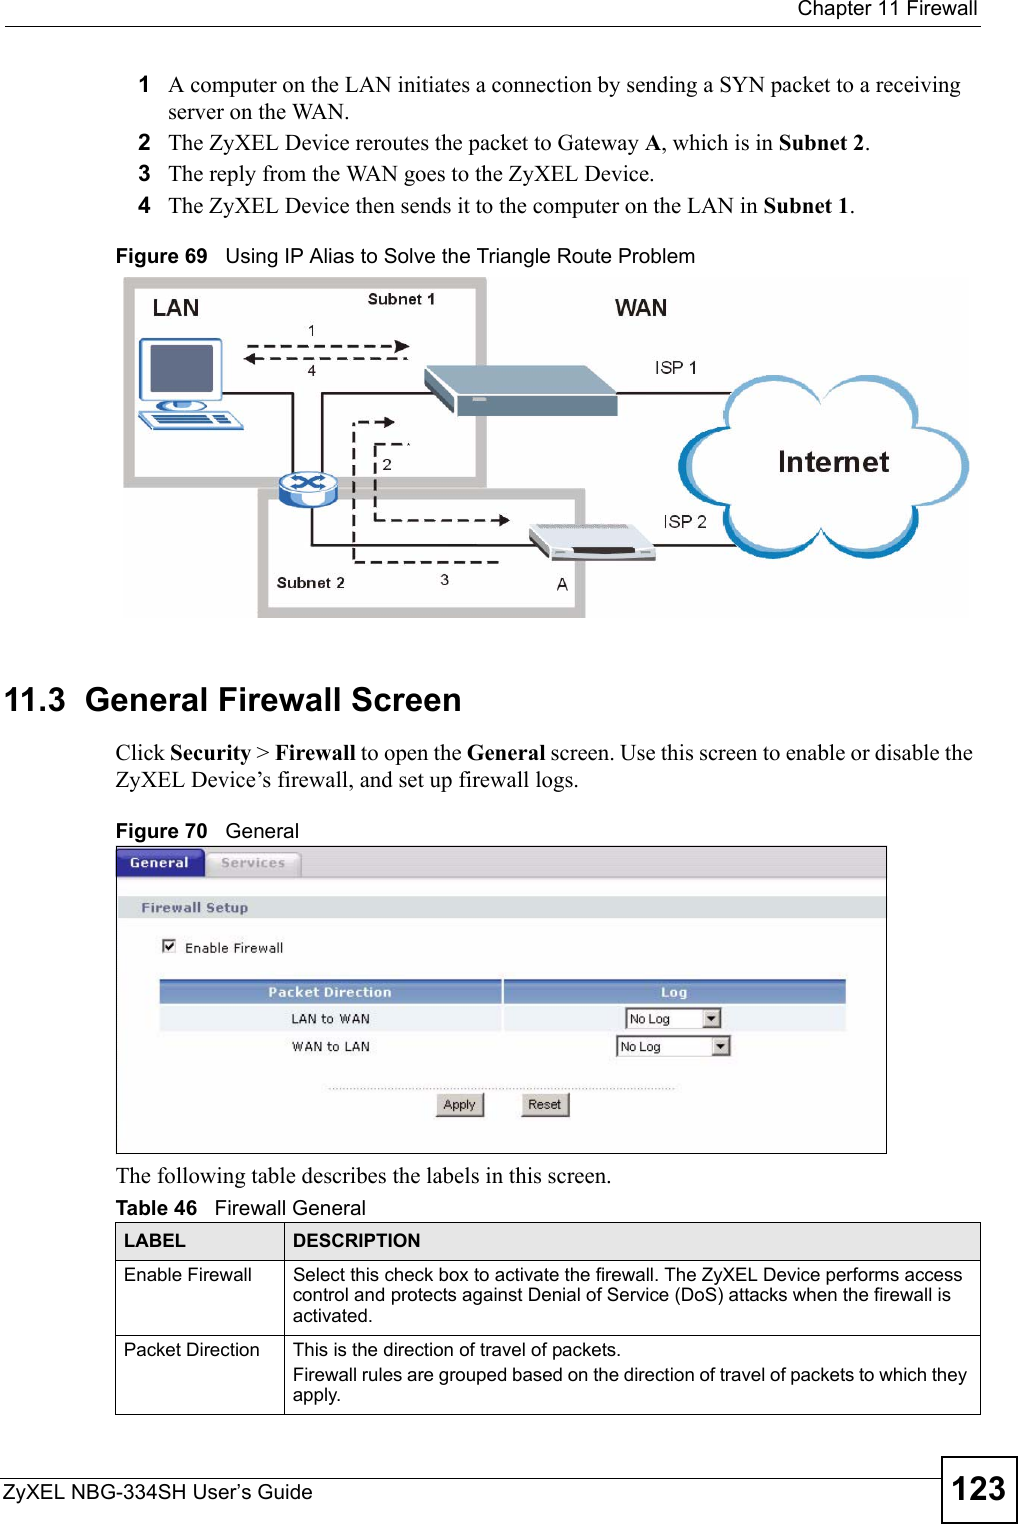  Chapter 11 FirewallZyXEL NBG-334SH User’s Guide 1231A computer on the LAN initiates a connection by sending a SYN packet to a receiving server on the WAN.2The ZyXEL Device reroutes the packet to Gateway A, which is in Subnet 2. 3The reply from the WAN goes to the ZyXEL Device. 4The ZyXEL Device then sends it to the computer on the LAN in Subnet 1.  Figure 69   Using IP Alias to Solve the Triangle Route Problem11.3  General Firewall Screen   Click Security &gt; Firewall to open the General screen. Use this screen to enable or disable the ZyXEL Device’s firewall, and set up firewall logs. Figure 70   GeneralThe following table describes the labels in this screen.Table 46   Firewall GeneralLABEL DESCRIPTIONEnable Firewall Select this check box to activate the firewall. The ZyXEL Device performs access control and protects against Denial of Service (DoS) attacks when the firewall is activated.Packet Direction This is the direction of travel of packets.Firewall rules are grouped based on the direction of travel of packets to which they apply. 